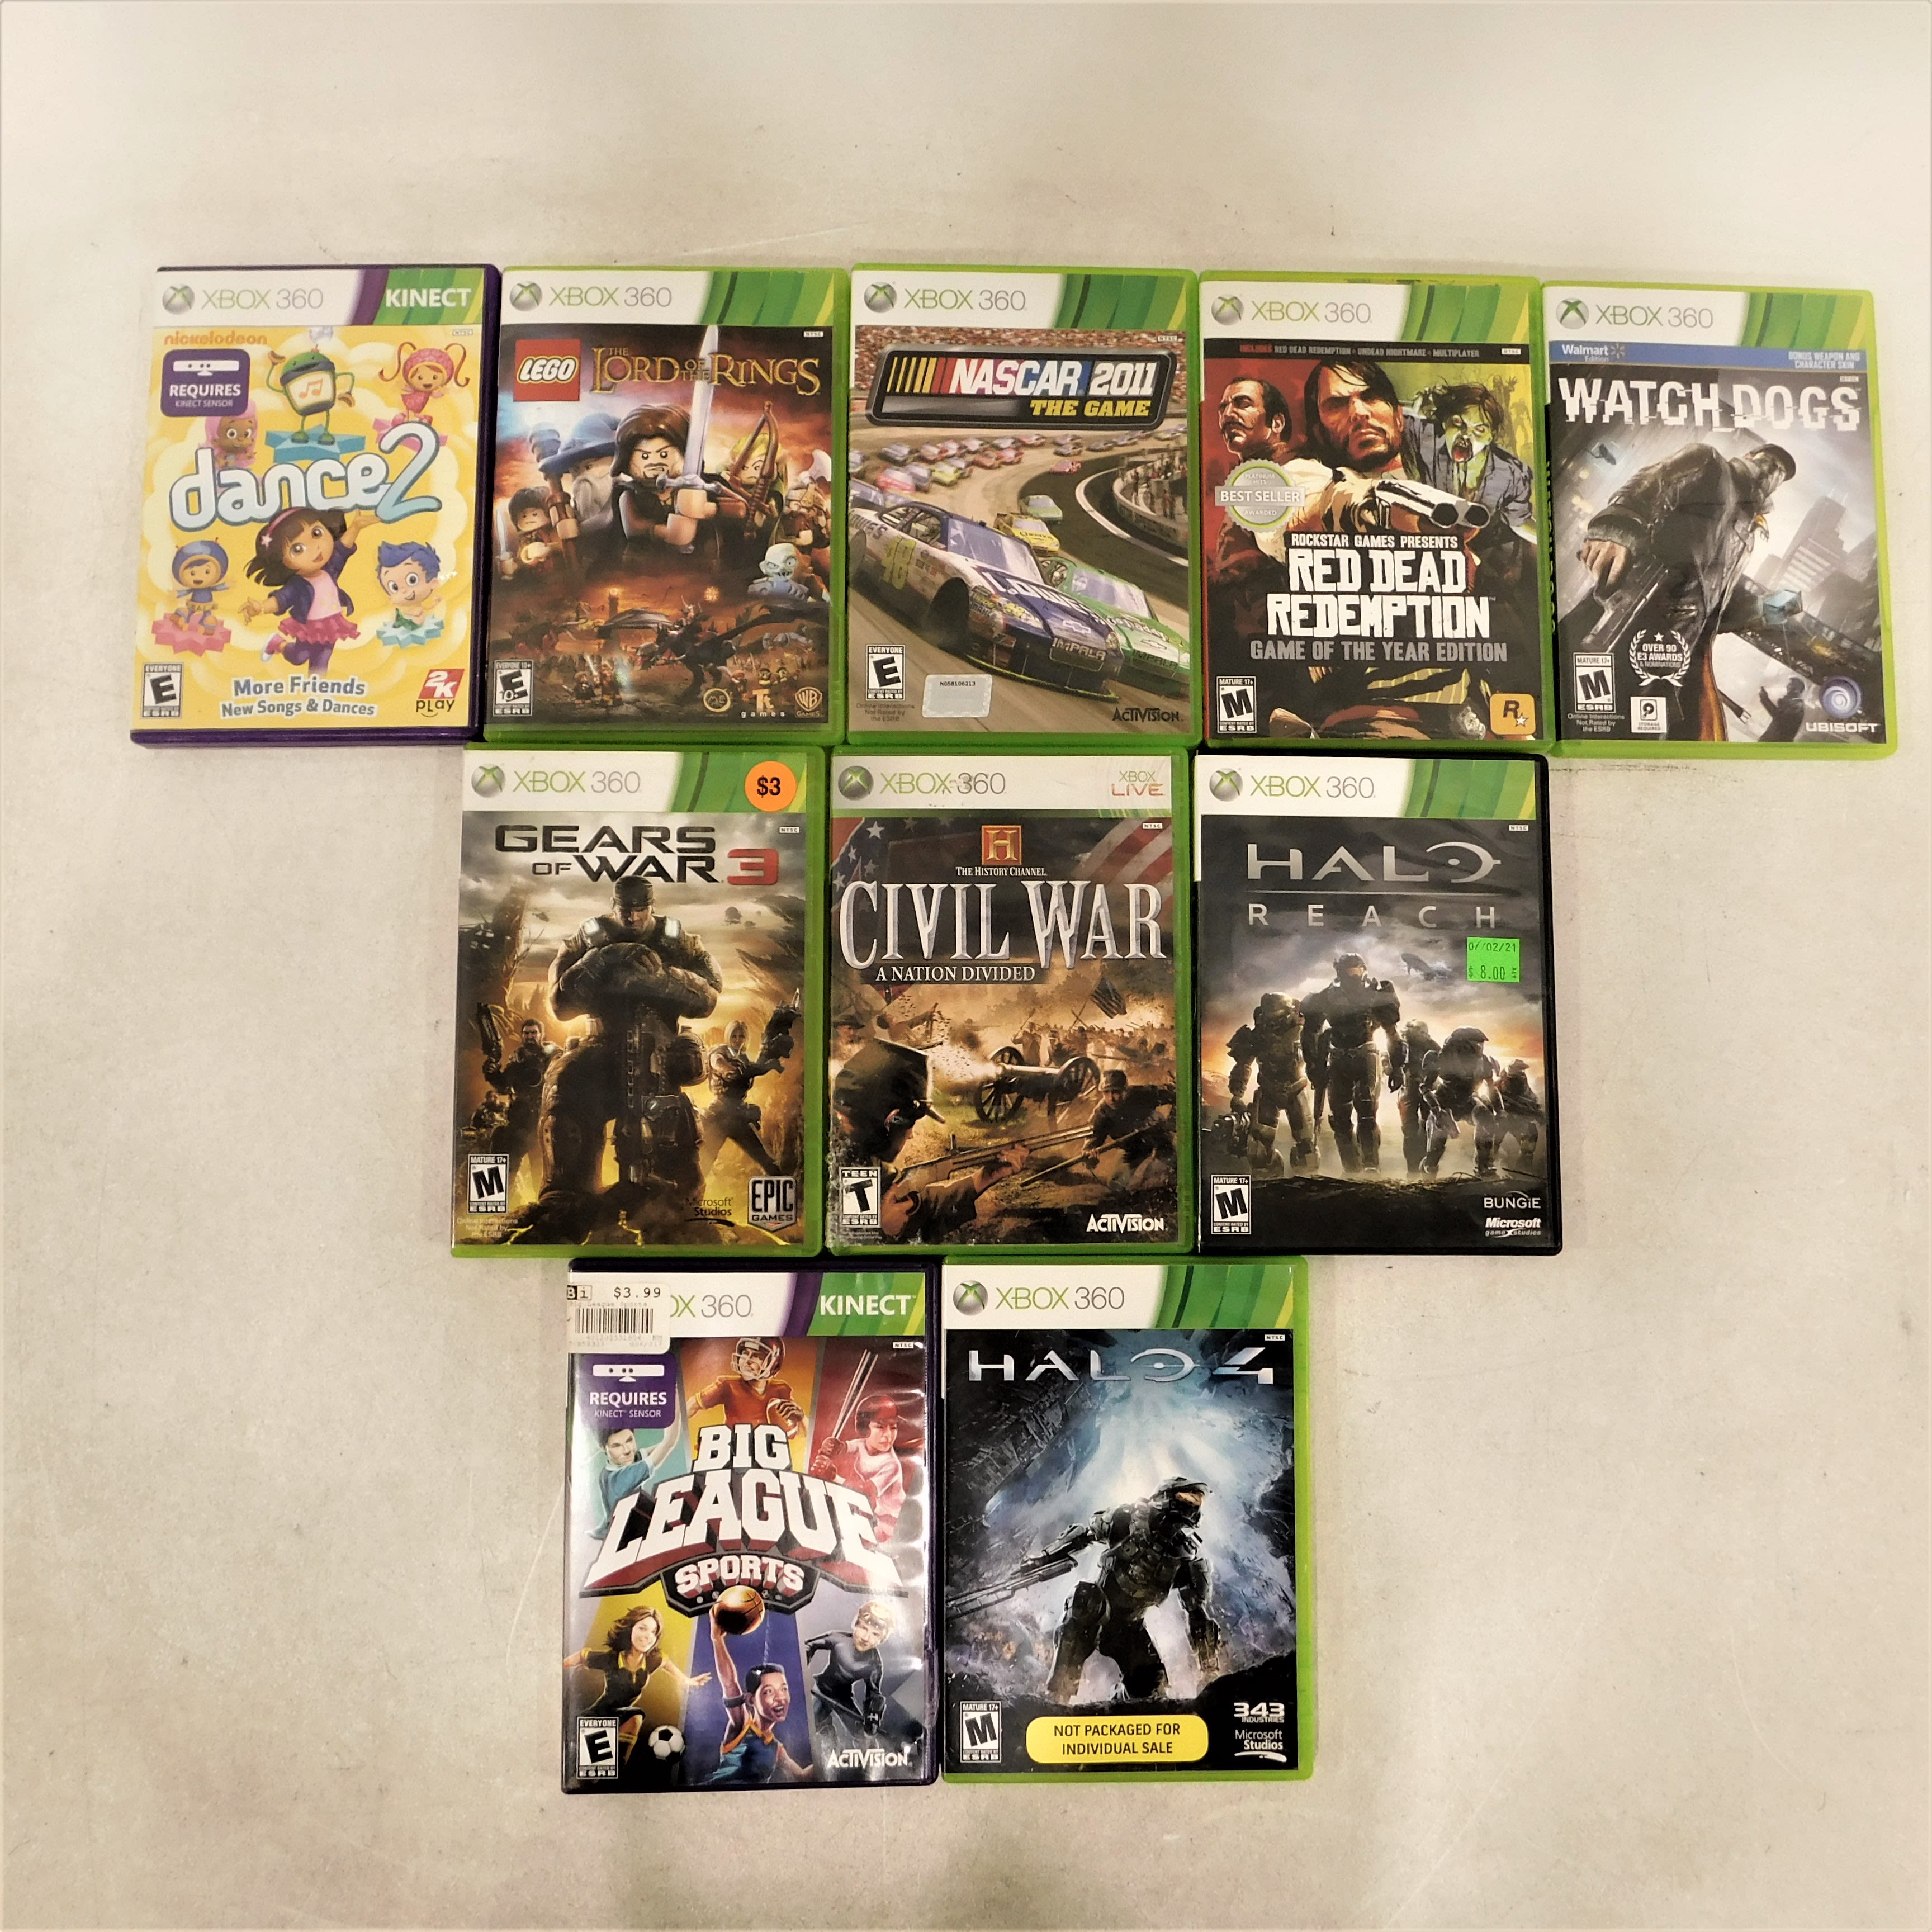 Halo 5, Dark Souls 3, Gears of War 4 for Xbox one for Sale in Stockton, CA  - OfferUp